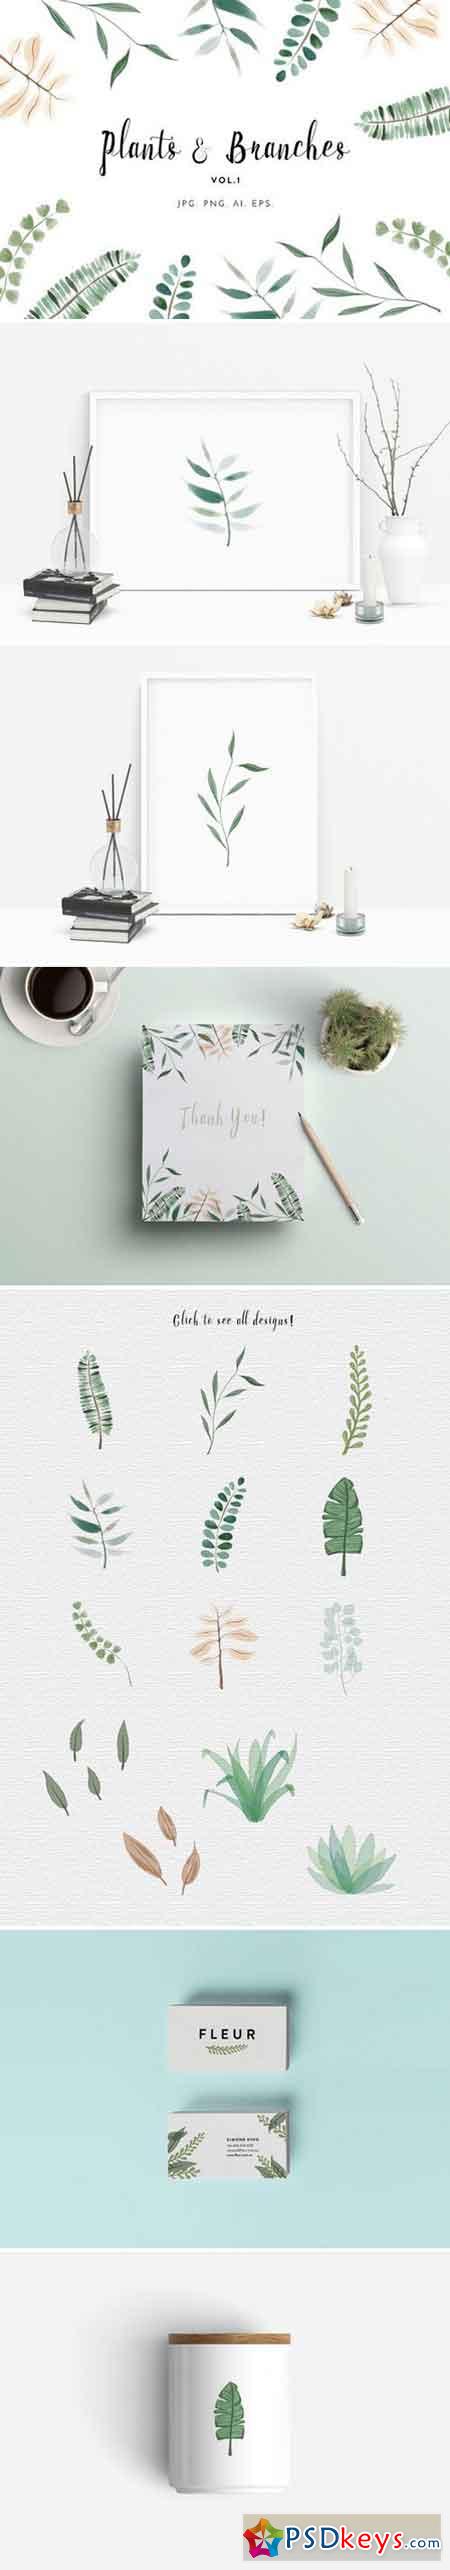 Watercolour Plants & Branches 679126 » Free Download Photoshop Vector ...